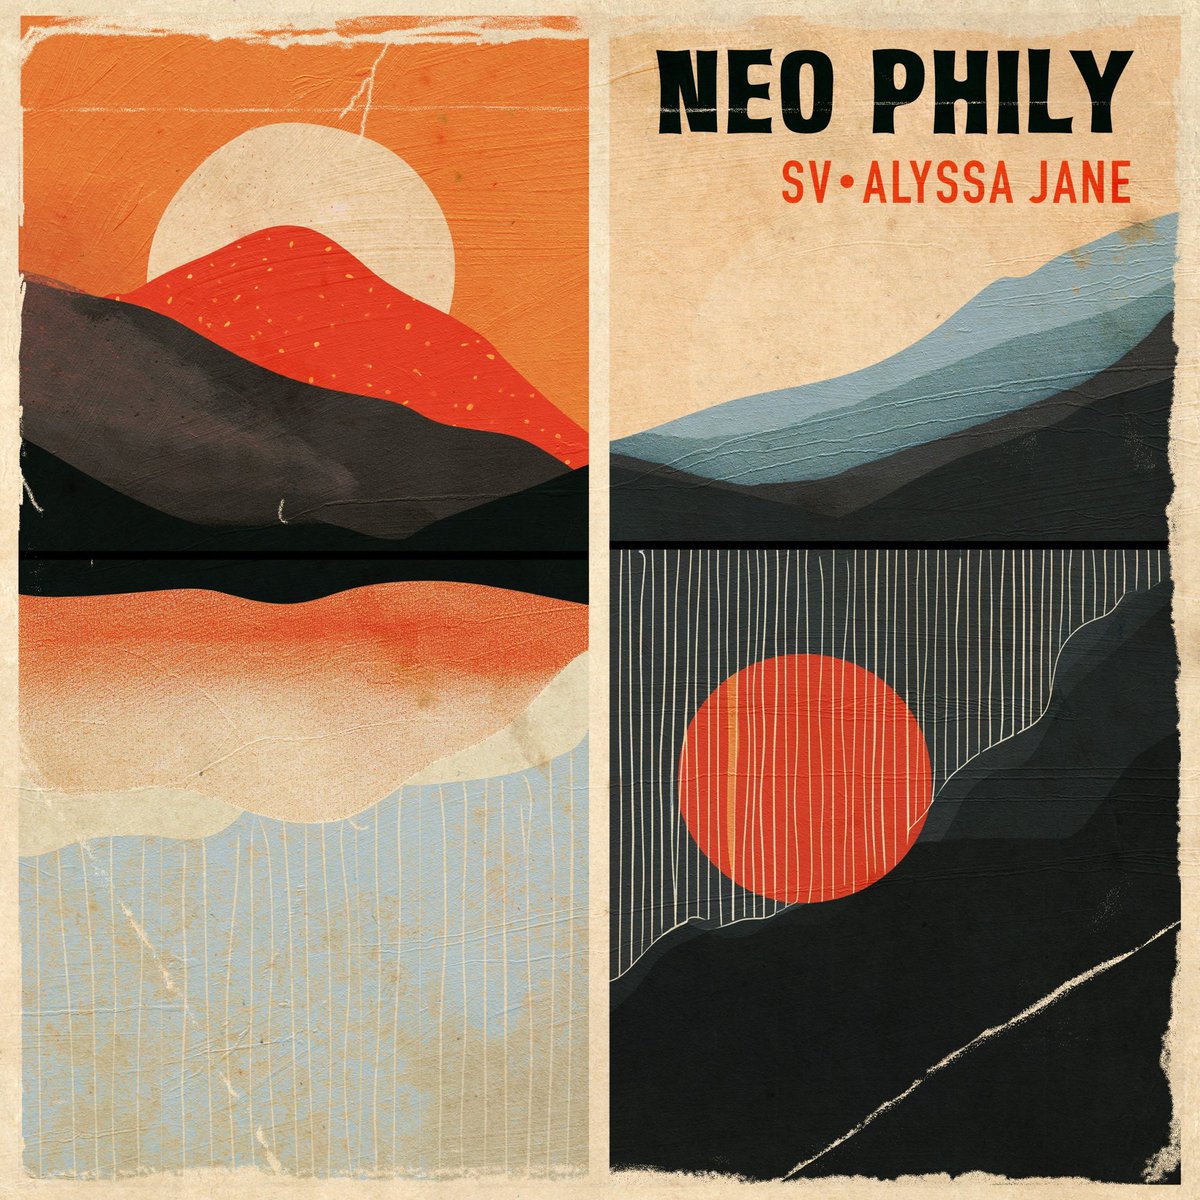 Listen to the album 'Neo Phily' and experience new musical creations from SV and Alyssa Jane. #indiedockmusicblog #alternativepop indiedockmusicblog.co.uk/?p=23575